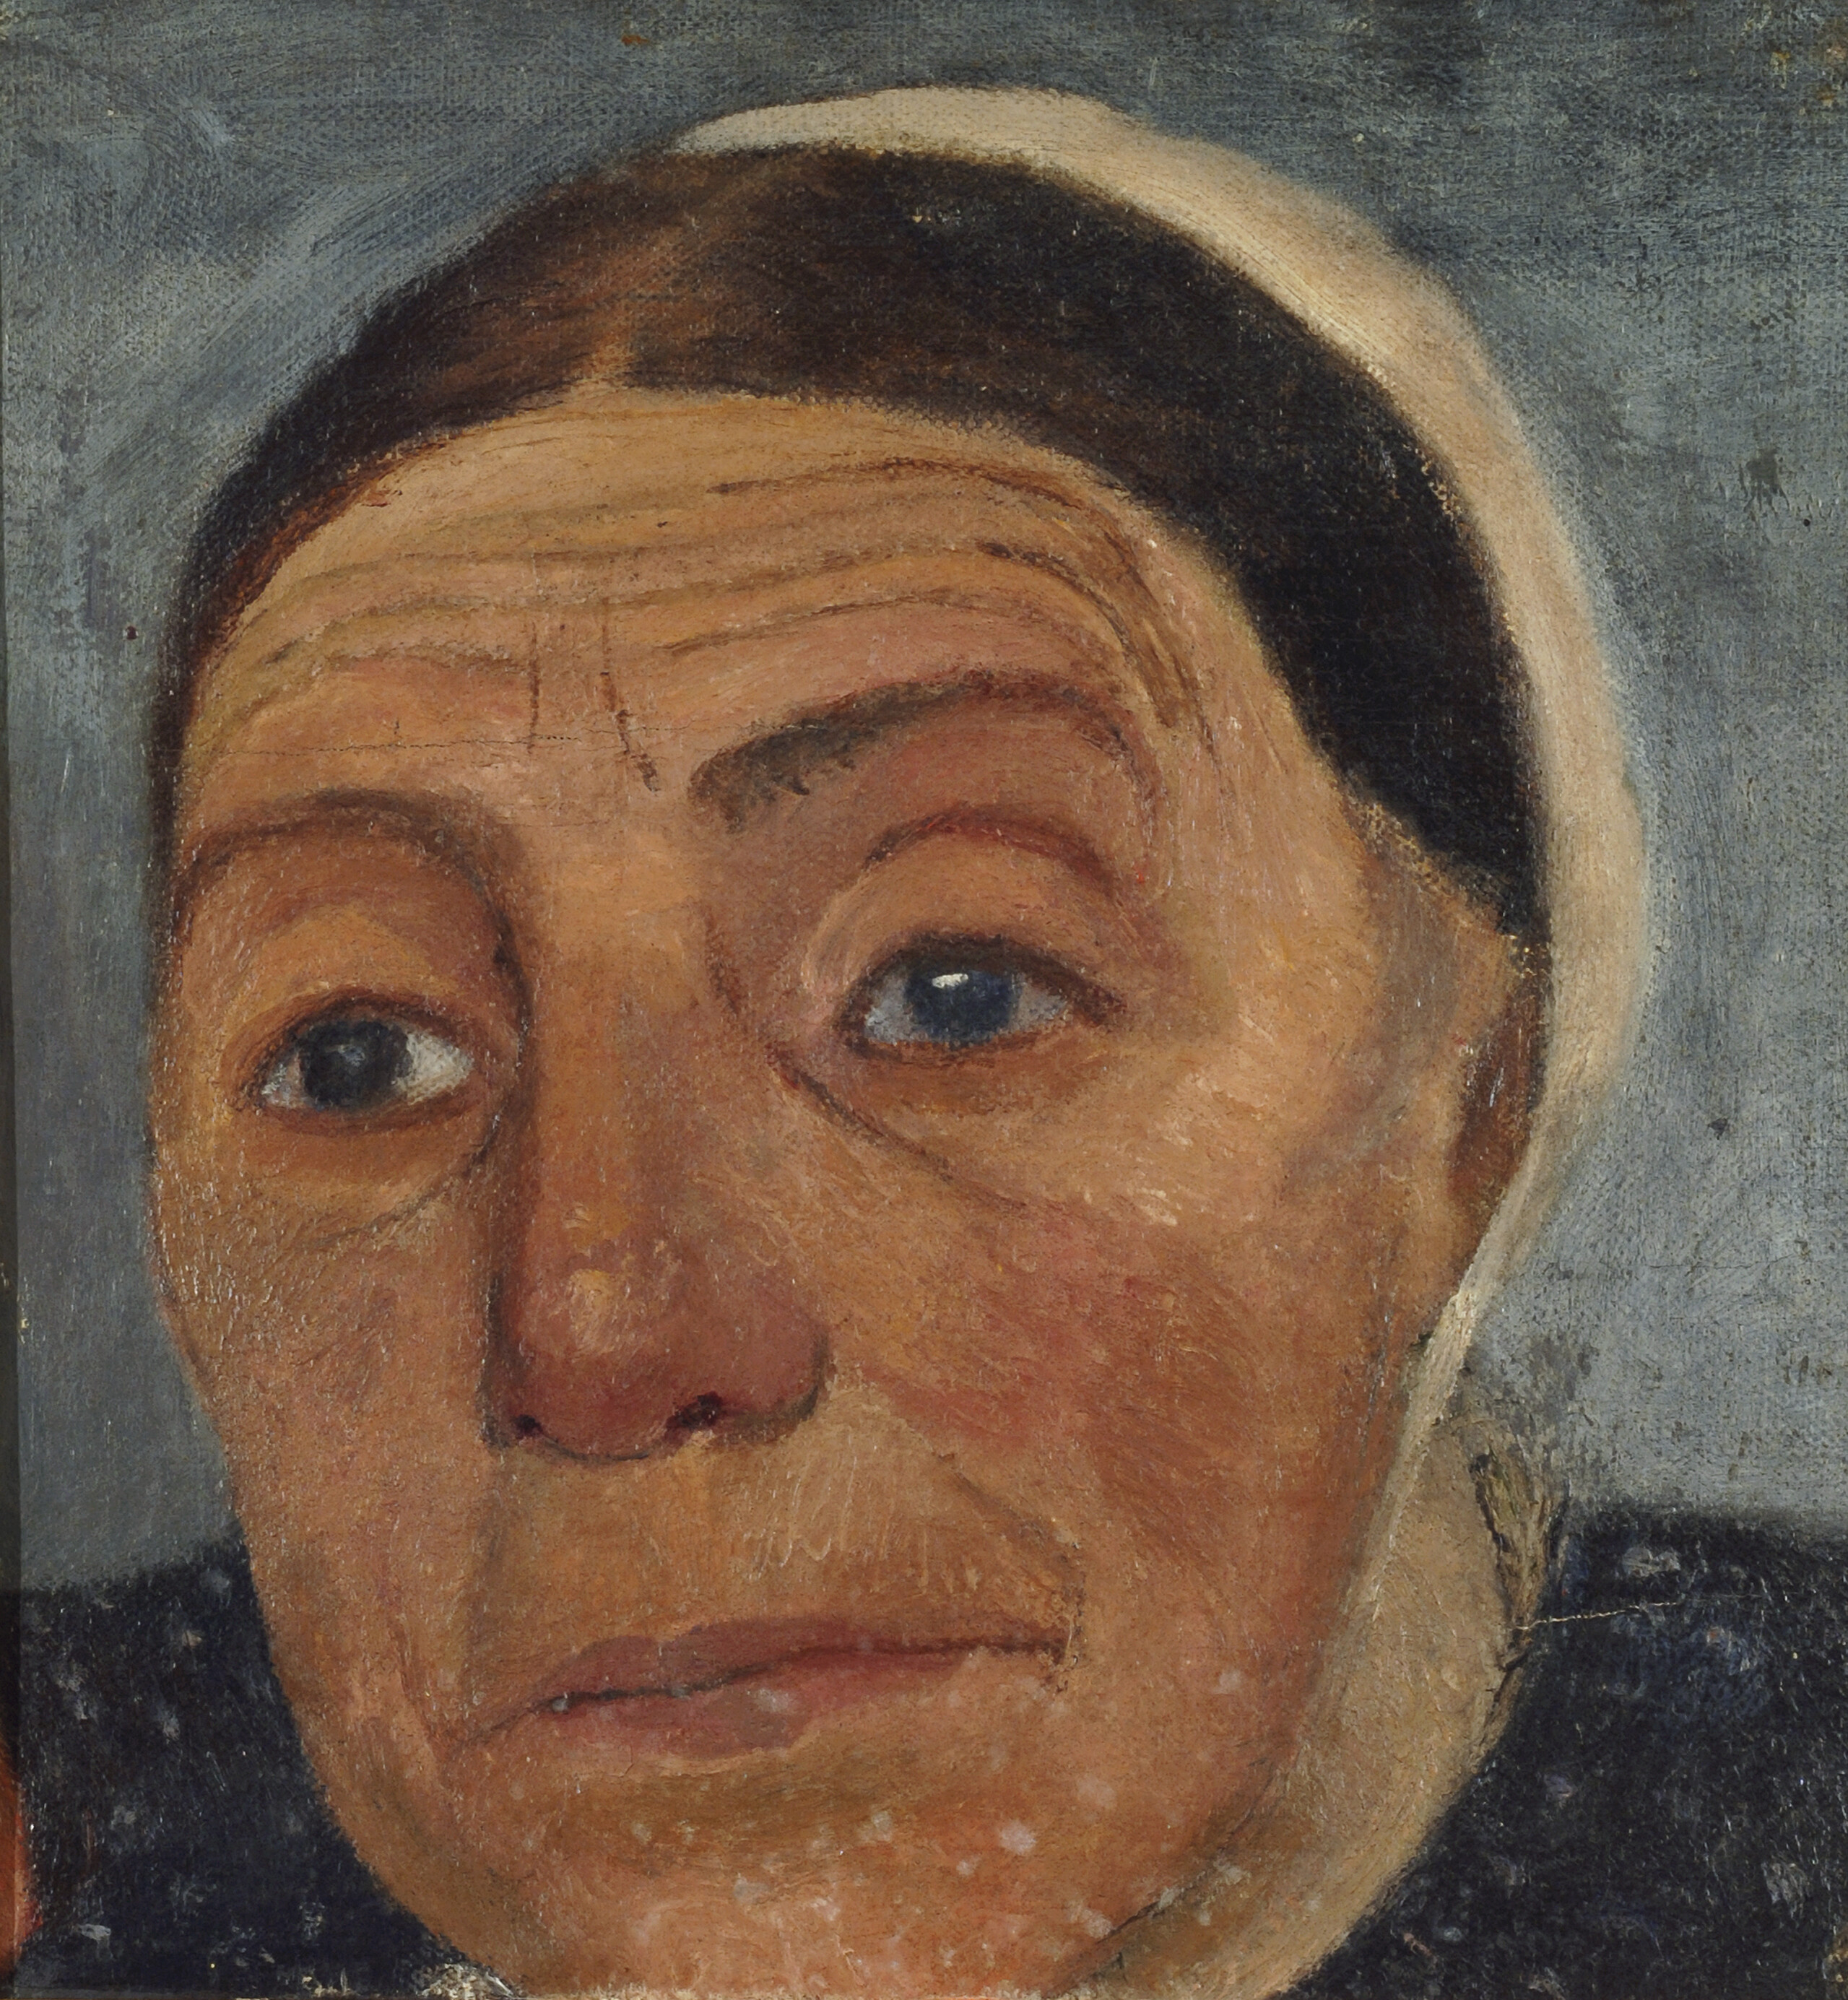 A closely cropped painting shows the face of a light-skinned woman against a blue background, gazing slightly to the side. She has brown hair contained by a cap or bonnet, and her age is implied by wrinkles crossing her broad forehead.